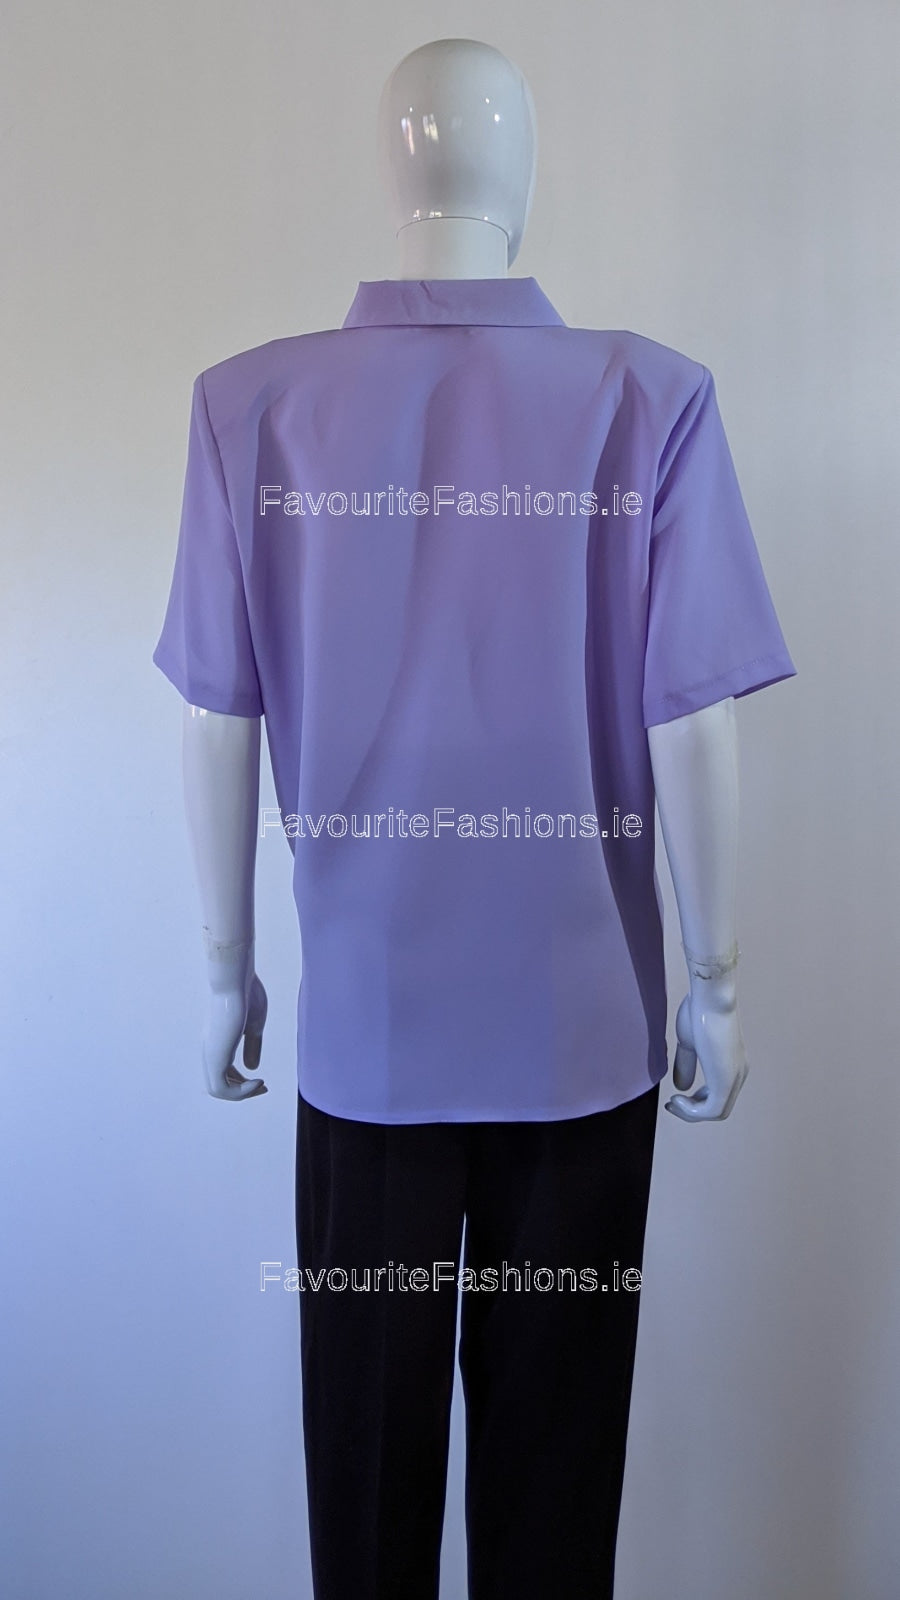 Lavender Collar Button Up Short Sleeve Blouse Top